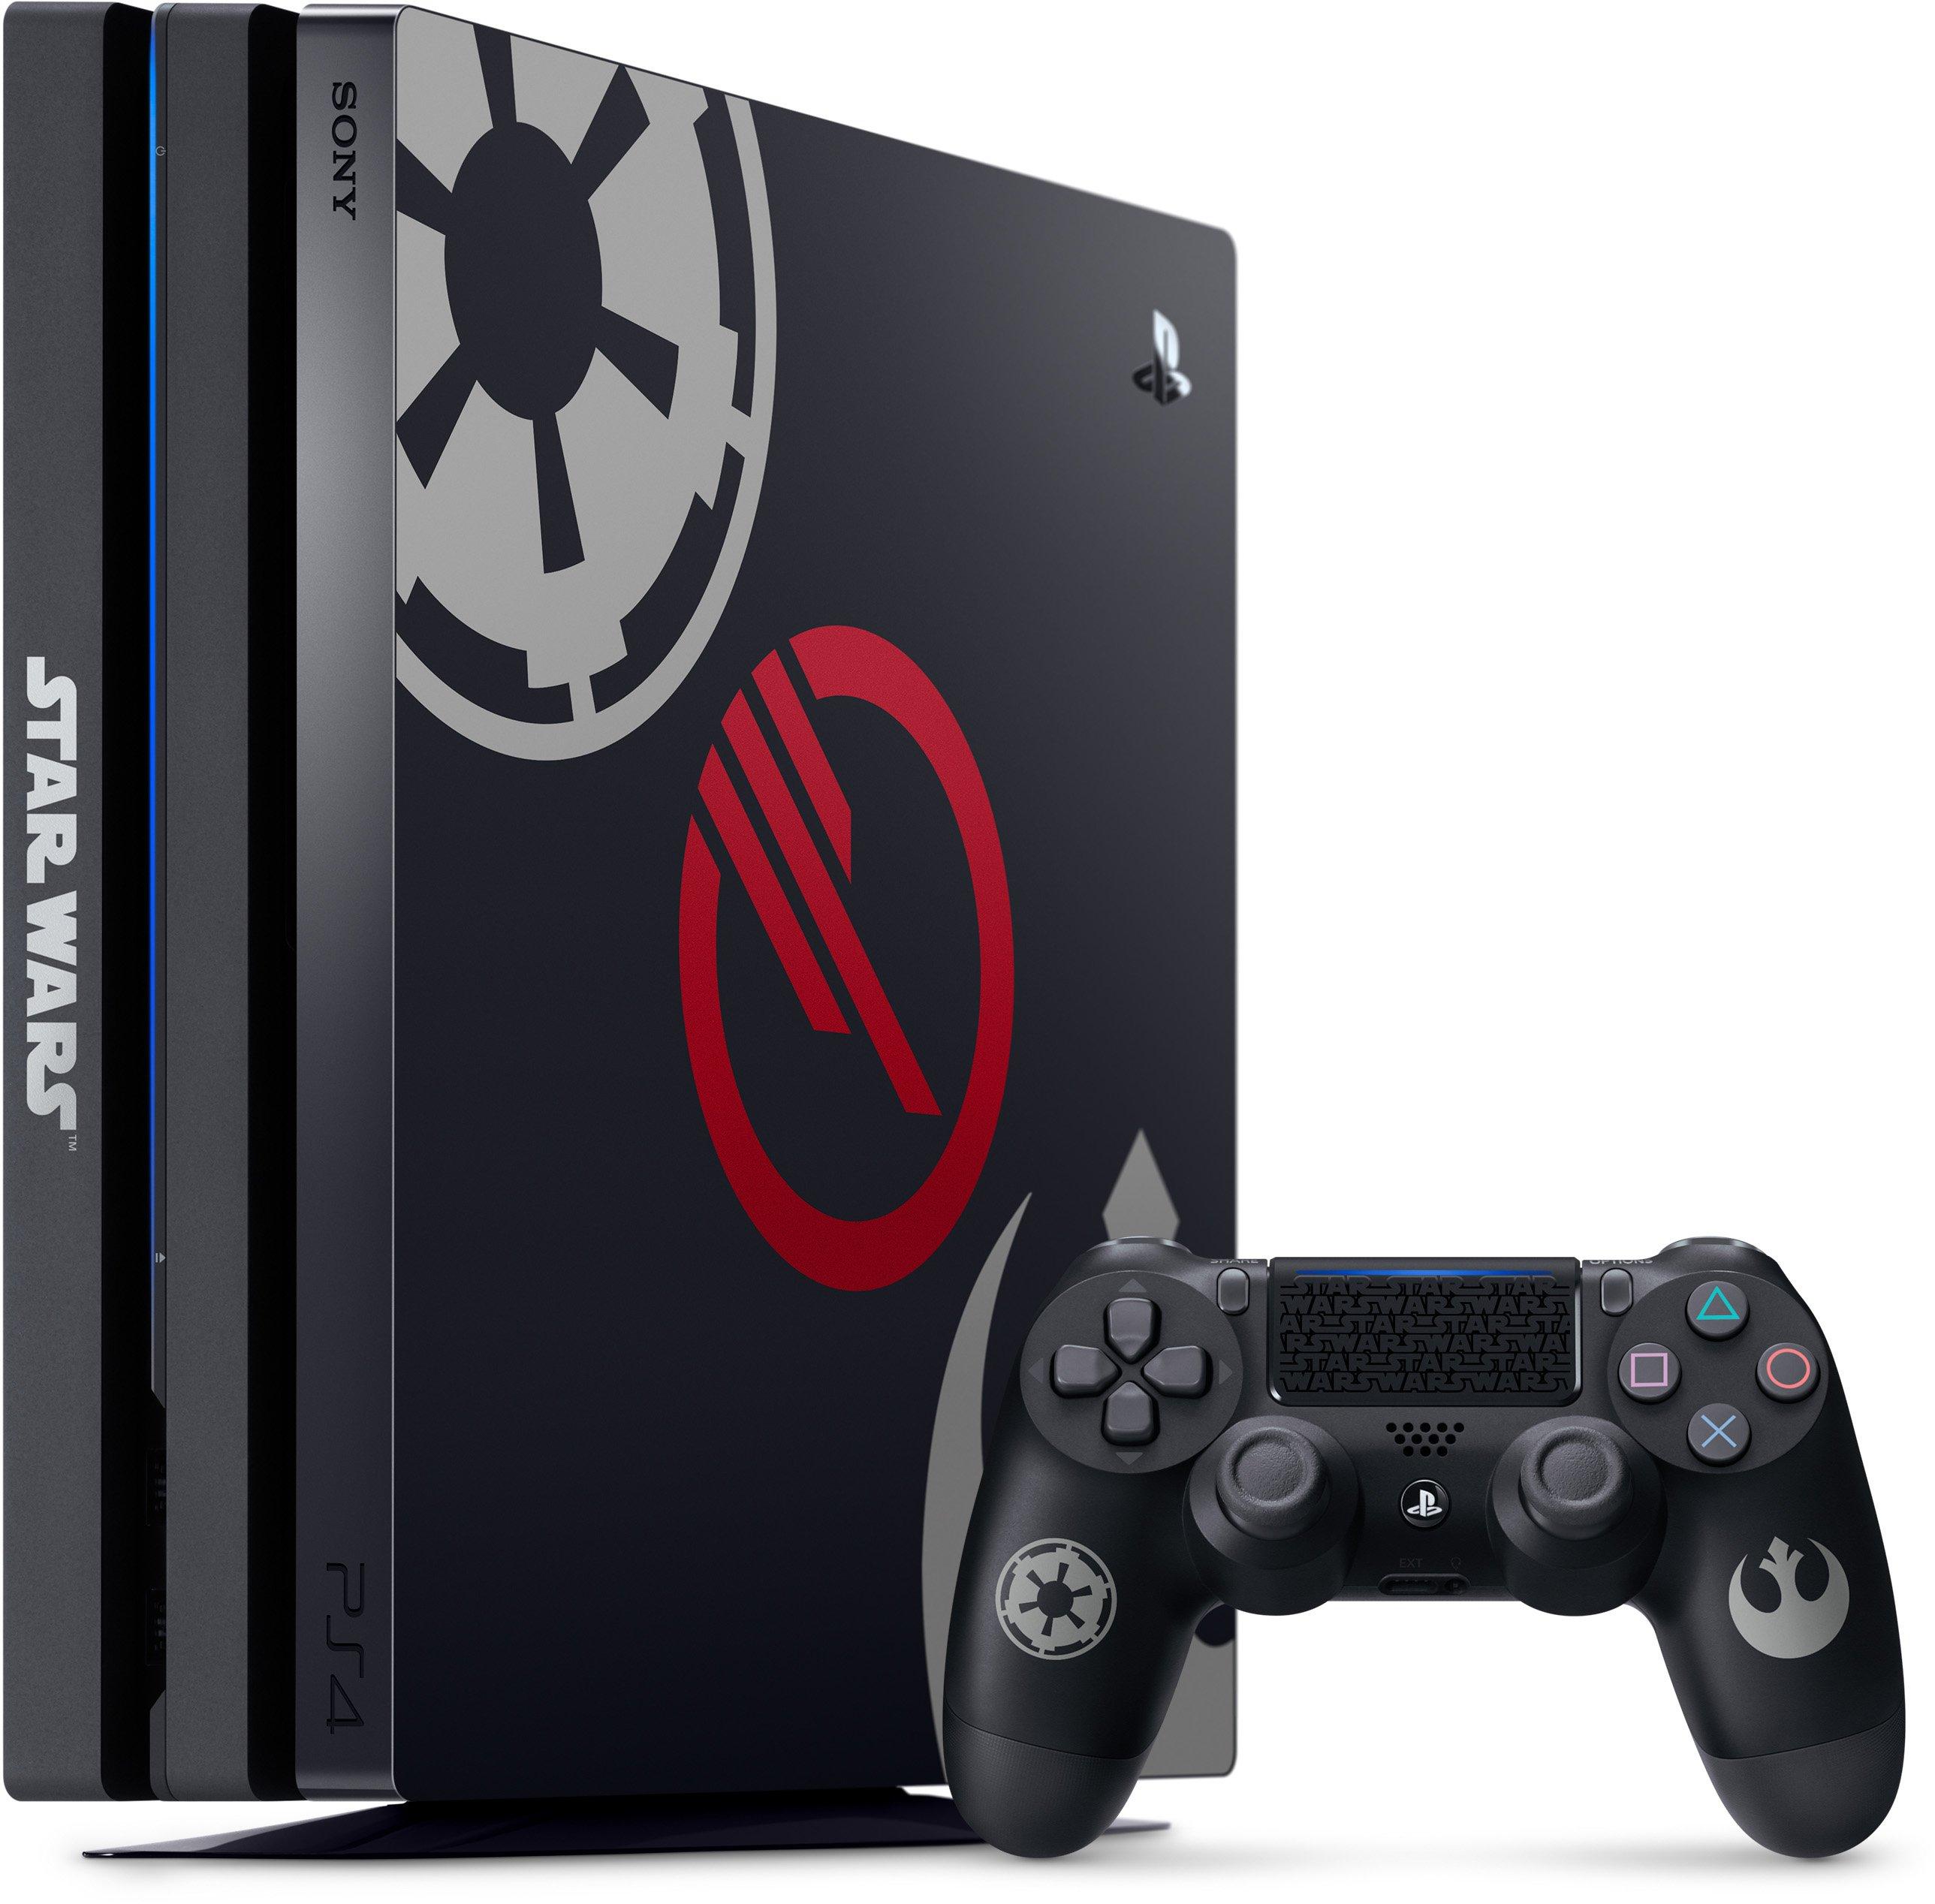 Ps4 ultimate edition. Sony ps4 Pro Limited Edition. Sony PLAYSTATION 4 Star Wars Edition. Ps4 Pro 1tb Limited Edition. PLAYSTATION 4 Pro 1tb Bundle.